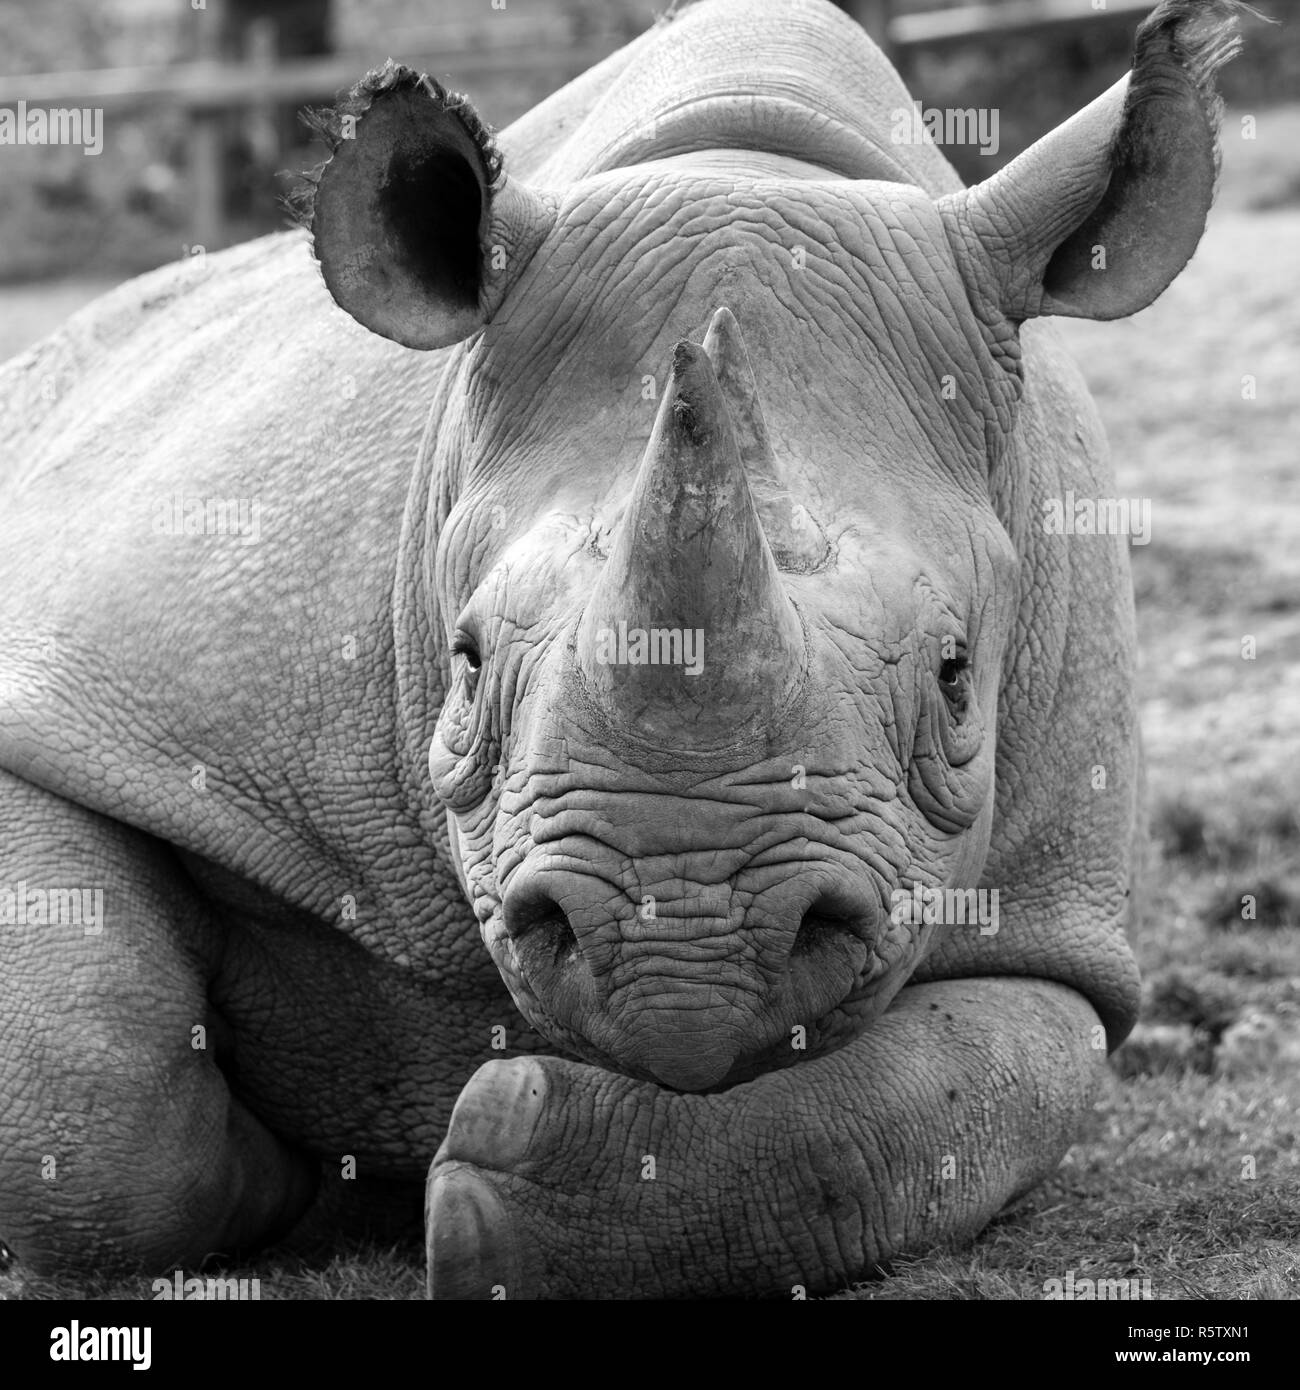 Close up of East African black rhinoceros looking straight to camera. Photographed in monochrome at Port Lympne Safari Park near Ashford Kent UK. Stock Photo